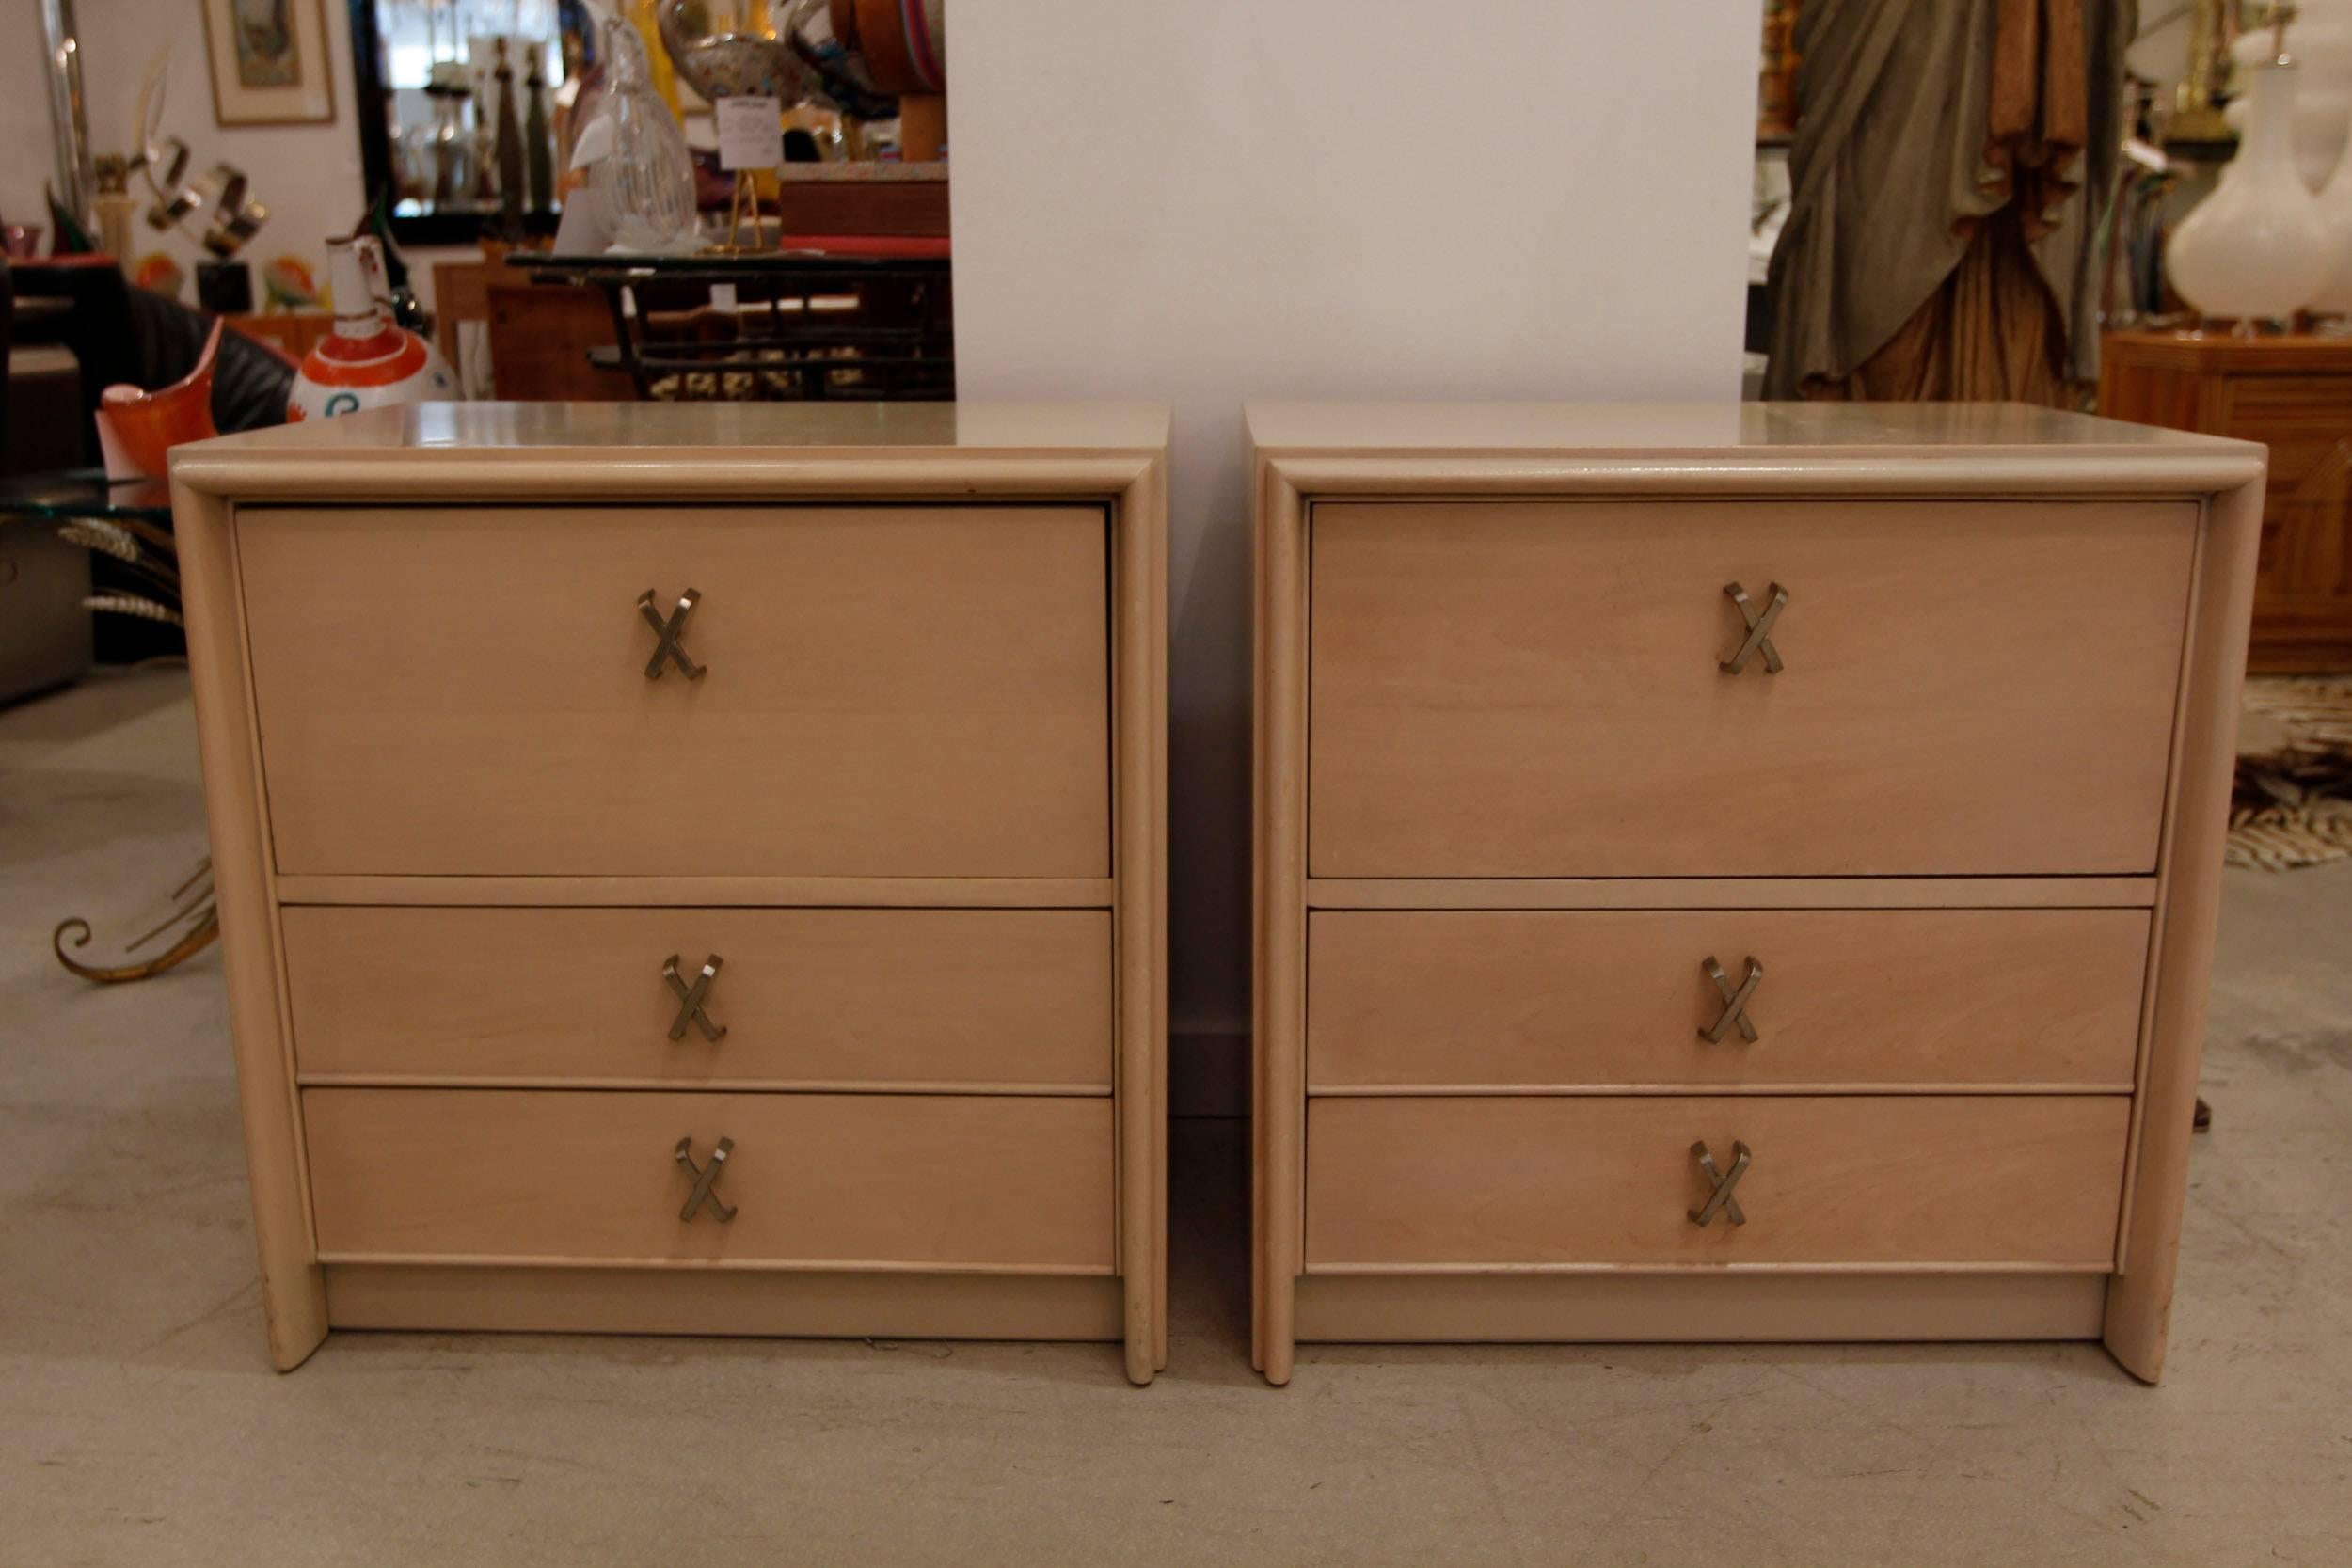 Pair of Paul Frankl bedside tables with X-handles. This pair coordinates with the other pieces we are offering including the long chest of drawers, the tall chest and the mirror. All items are listed and sold individually.